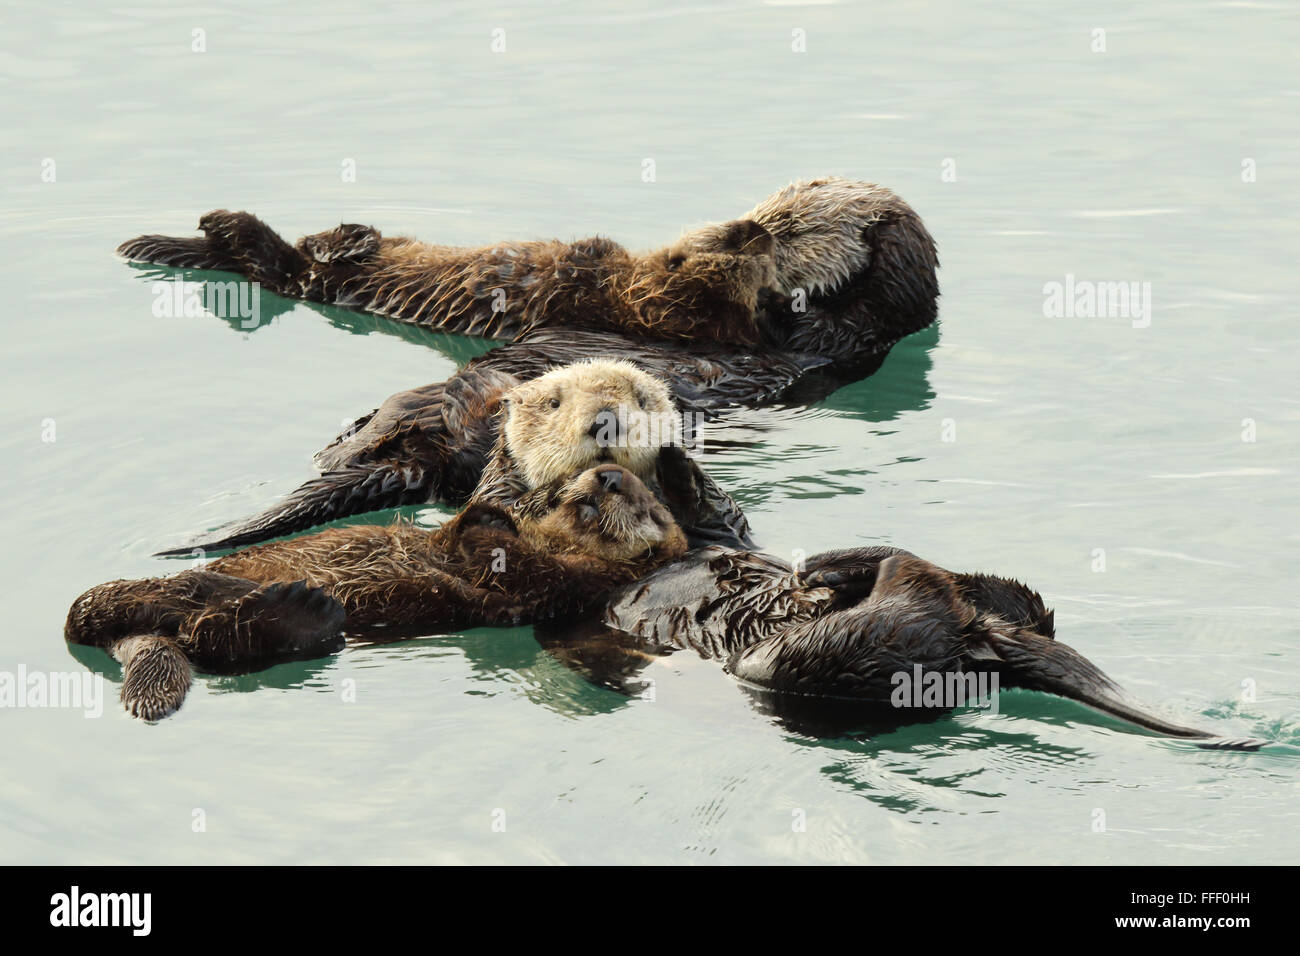 Sea Otter families floating together. Stock Photo